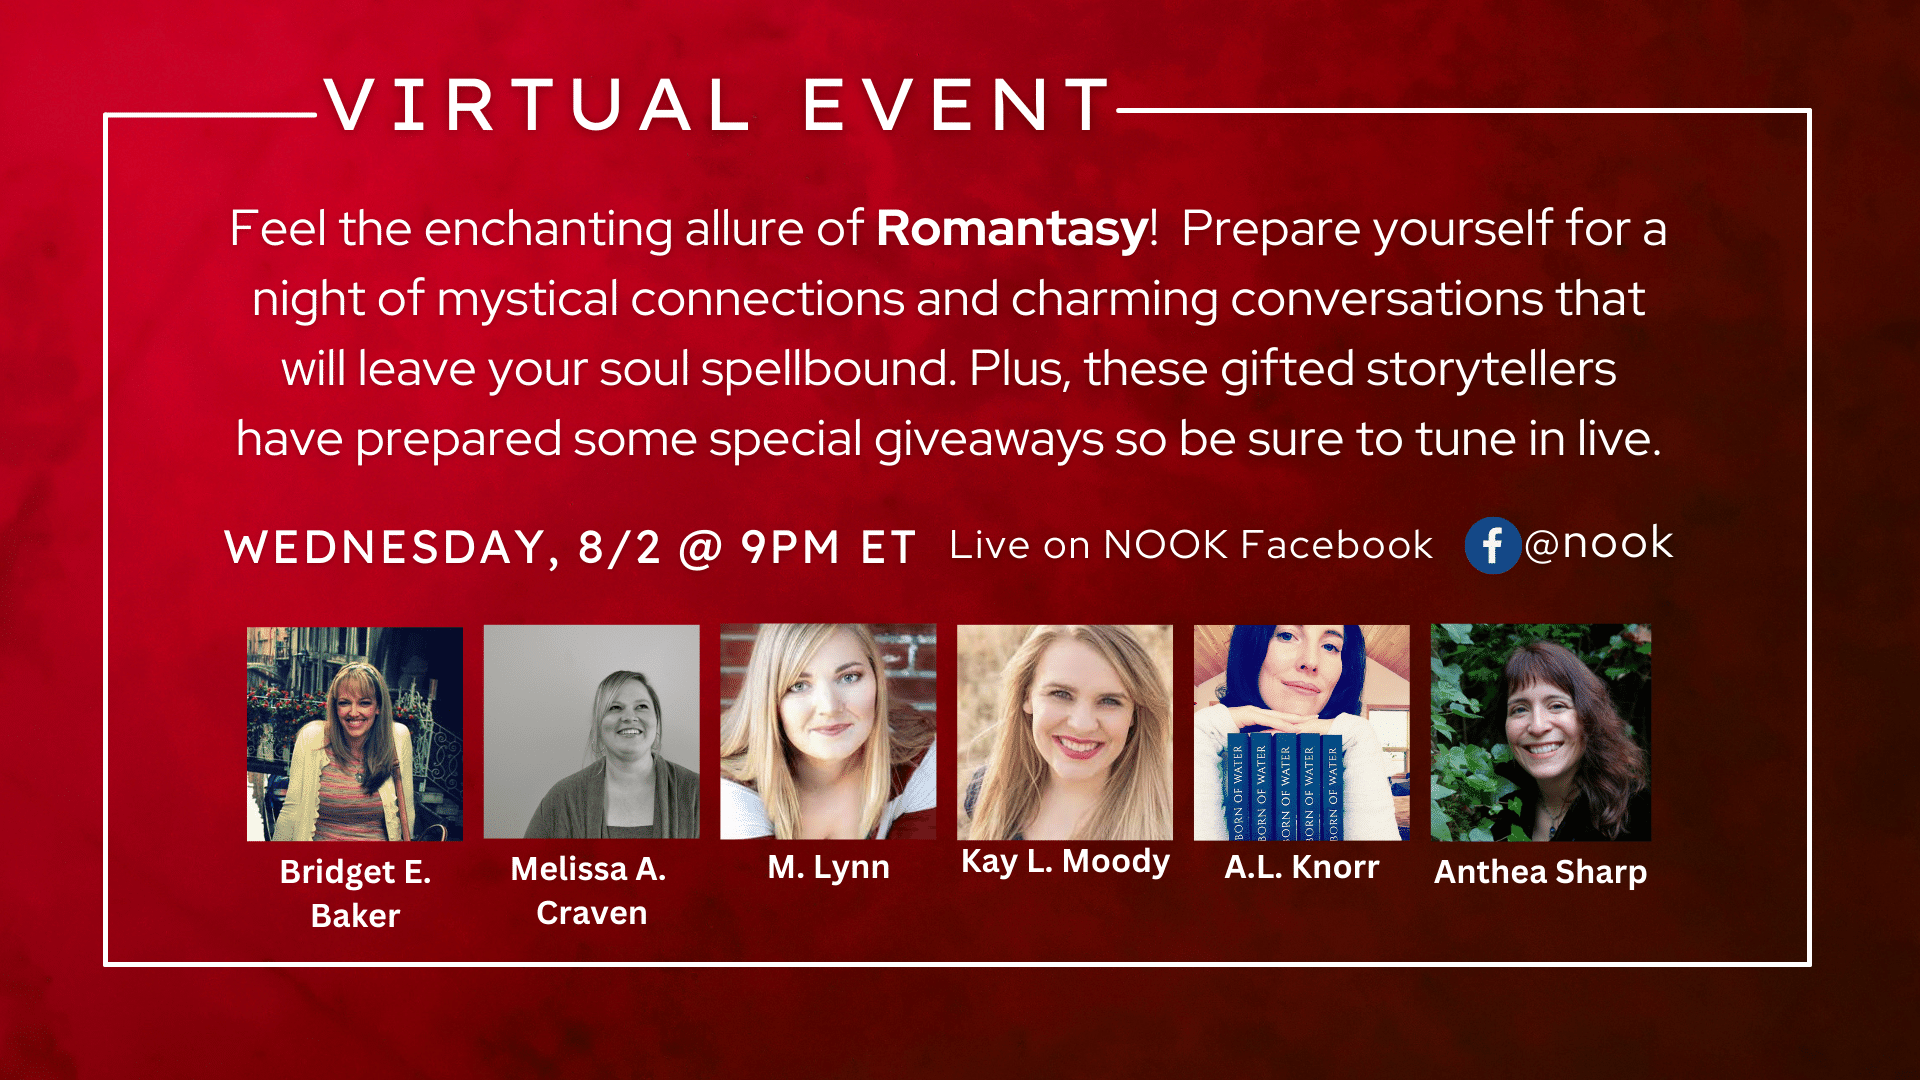 Facebook live event banner with romantasy authors: Bridget E. Baker, Melissa A. Craven, M. Lynn, Kay L. Moody, A.L. Knorr, and Anthea Sharp. 